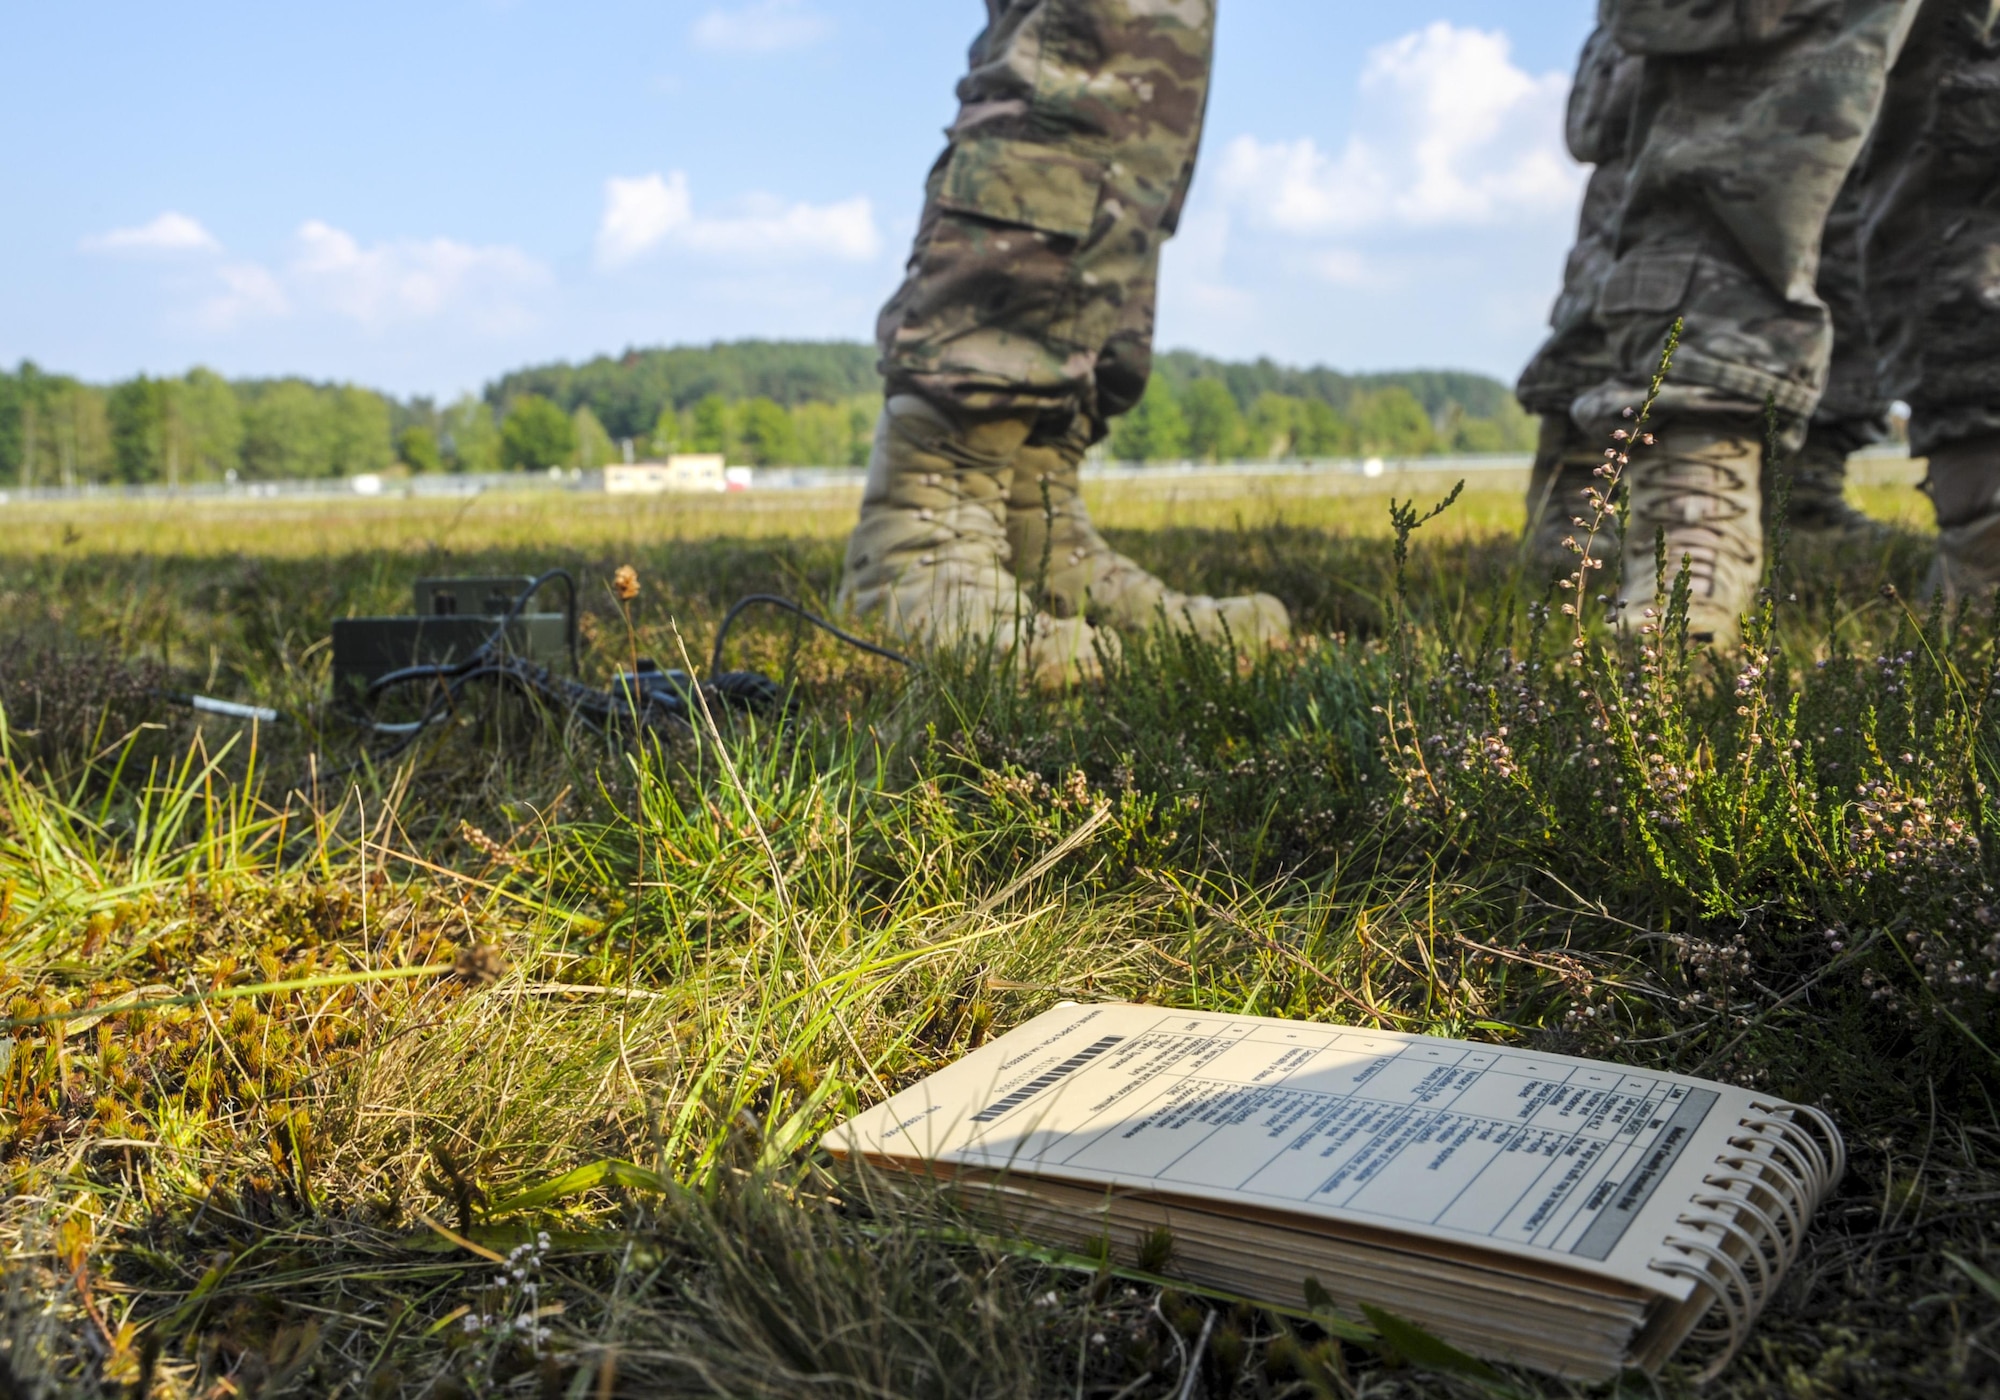 A handbook turned to the 9-line medevac form lies in the grass near a pickup zone during an exercise Cadre Focus 16.2 training scenario in Grafenwoehr, Germany, Sept. 27, 2016. U.S. armed forces members use the 9-line medevac form to quickly transmit information and request a medical evacuation. The request can be used in both peace and wartime scenarios. (U.S. Air Force photo by Staff Sgt. Timothy Moore)